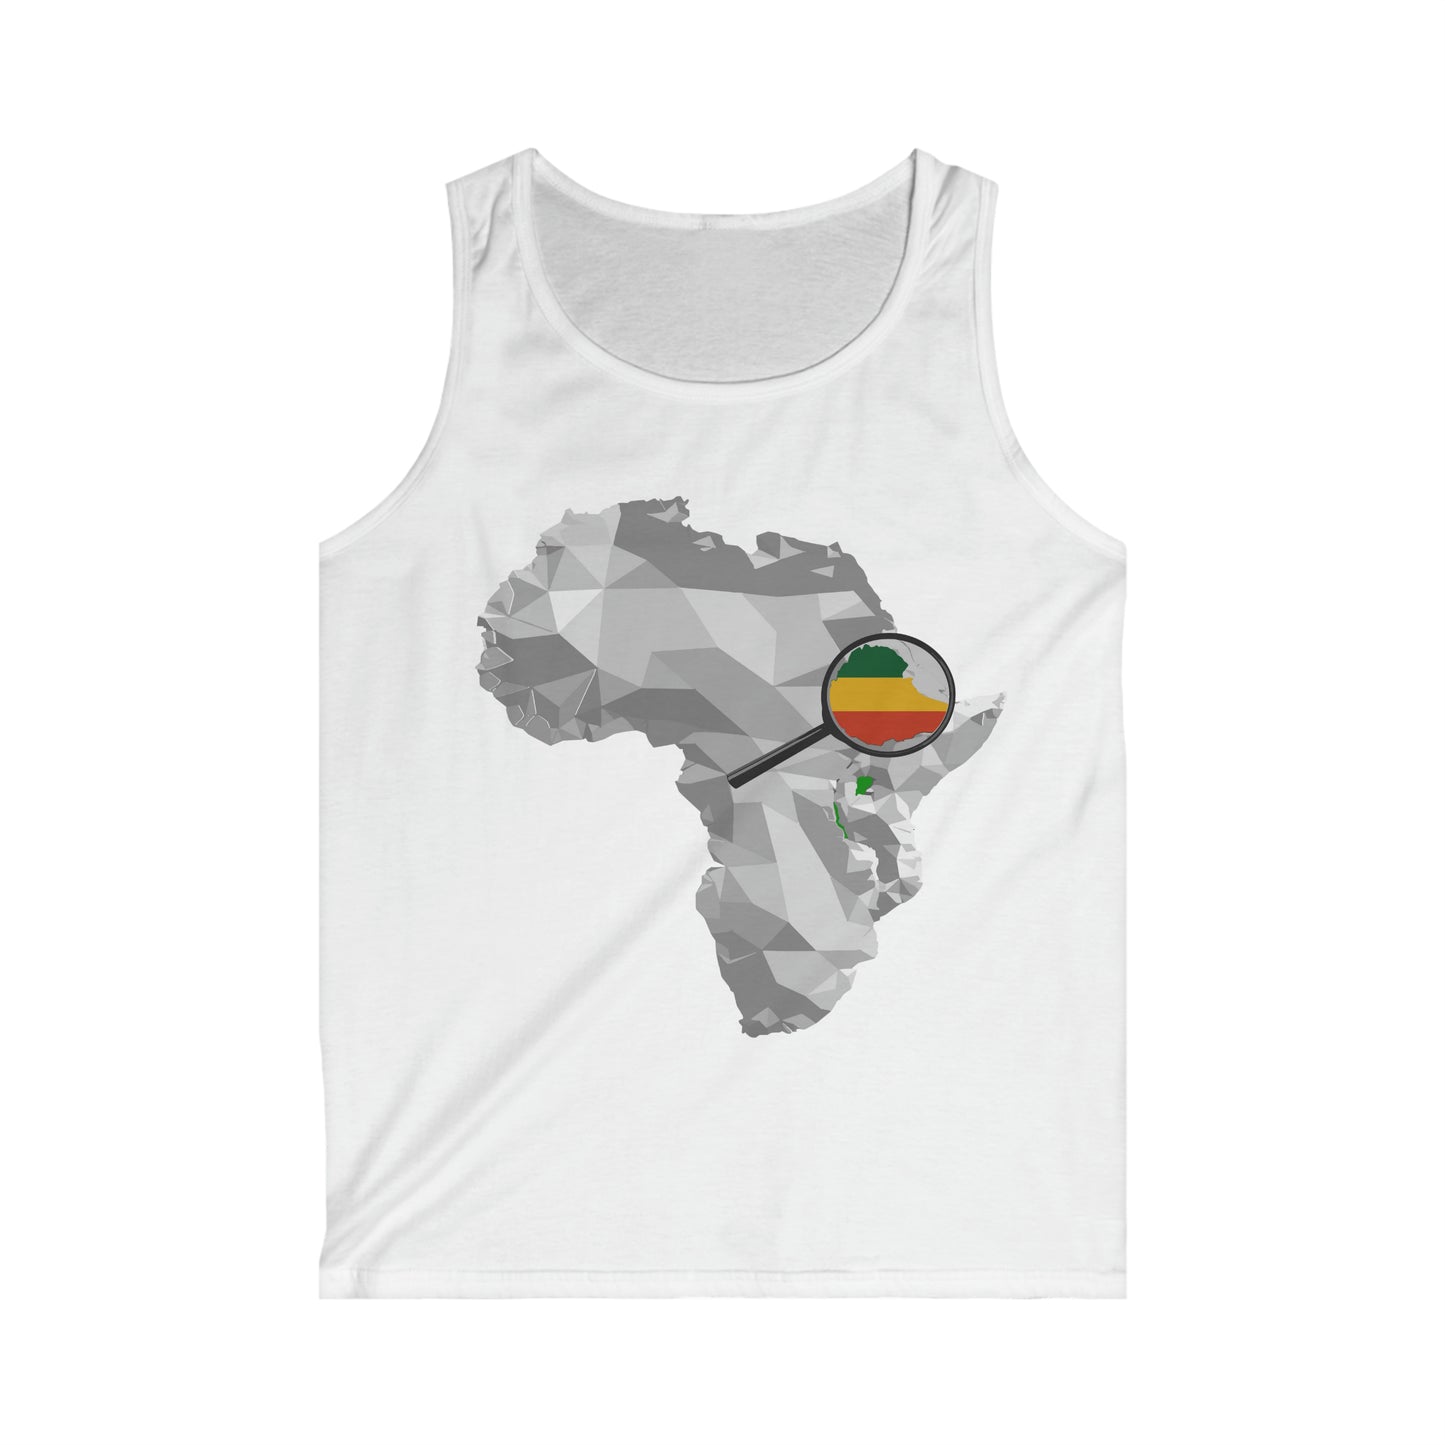 Copy of Amplified Ethiopia on African Map Tank Top - Tri Color Map